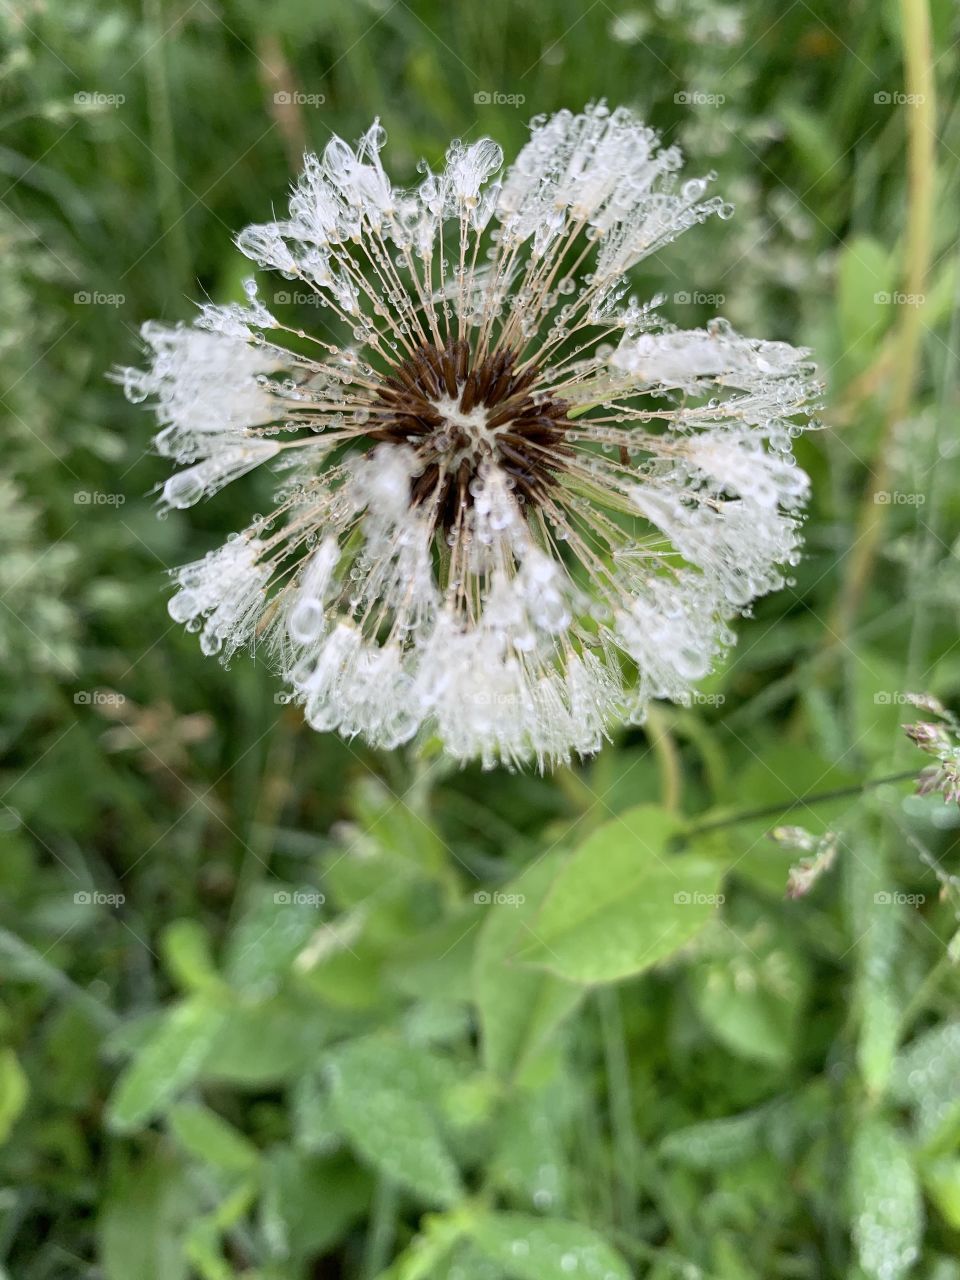 Closeup of a rain-soaked dandelion head gone to seed in a field in spring